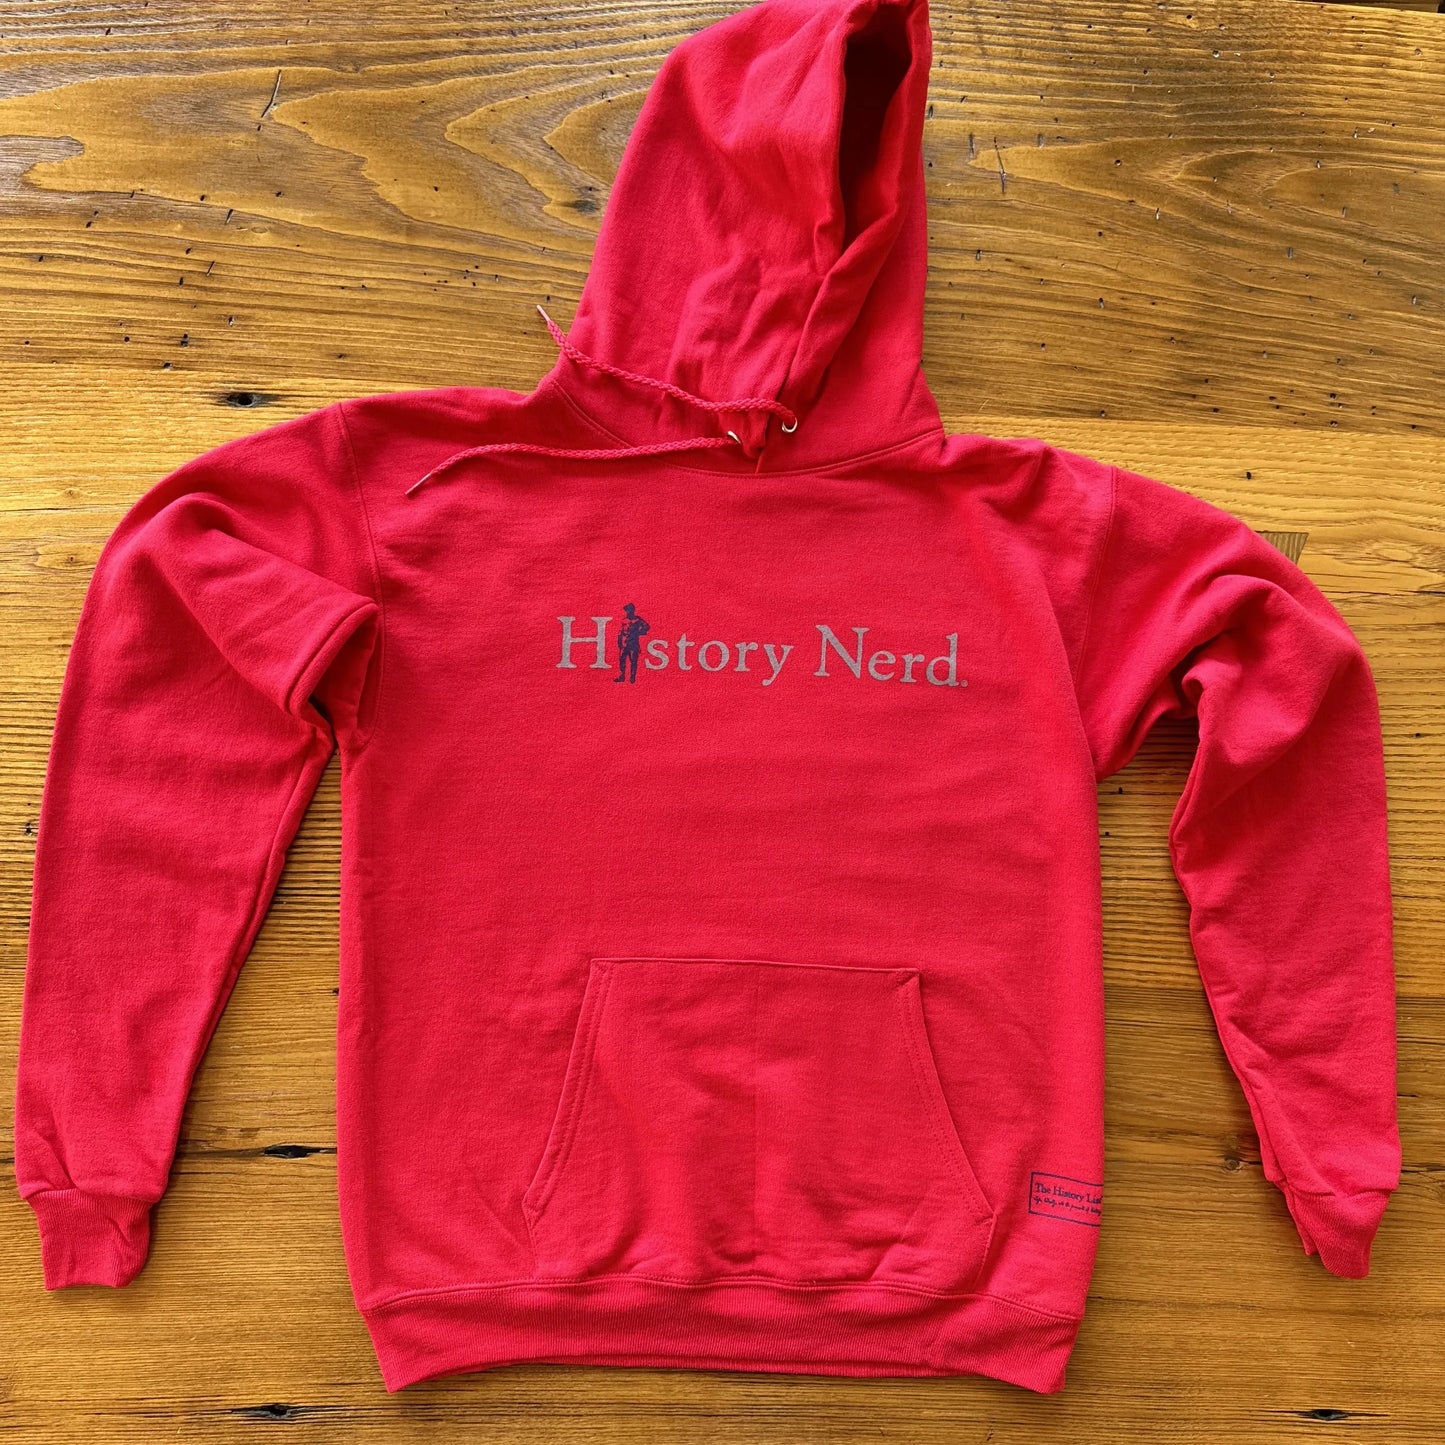 HISTORY NERD® with Teddy Roosevelt - Hooded sweatshirt from The History List store